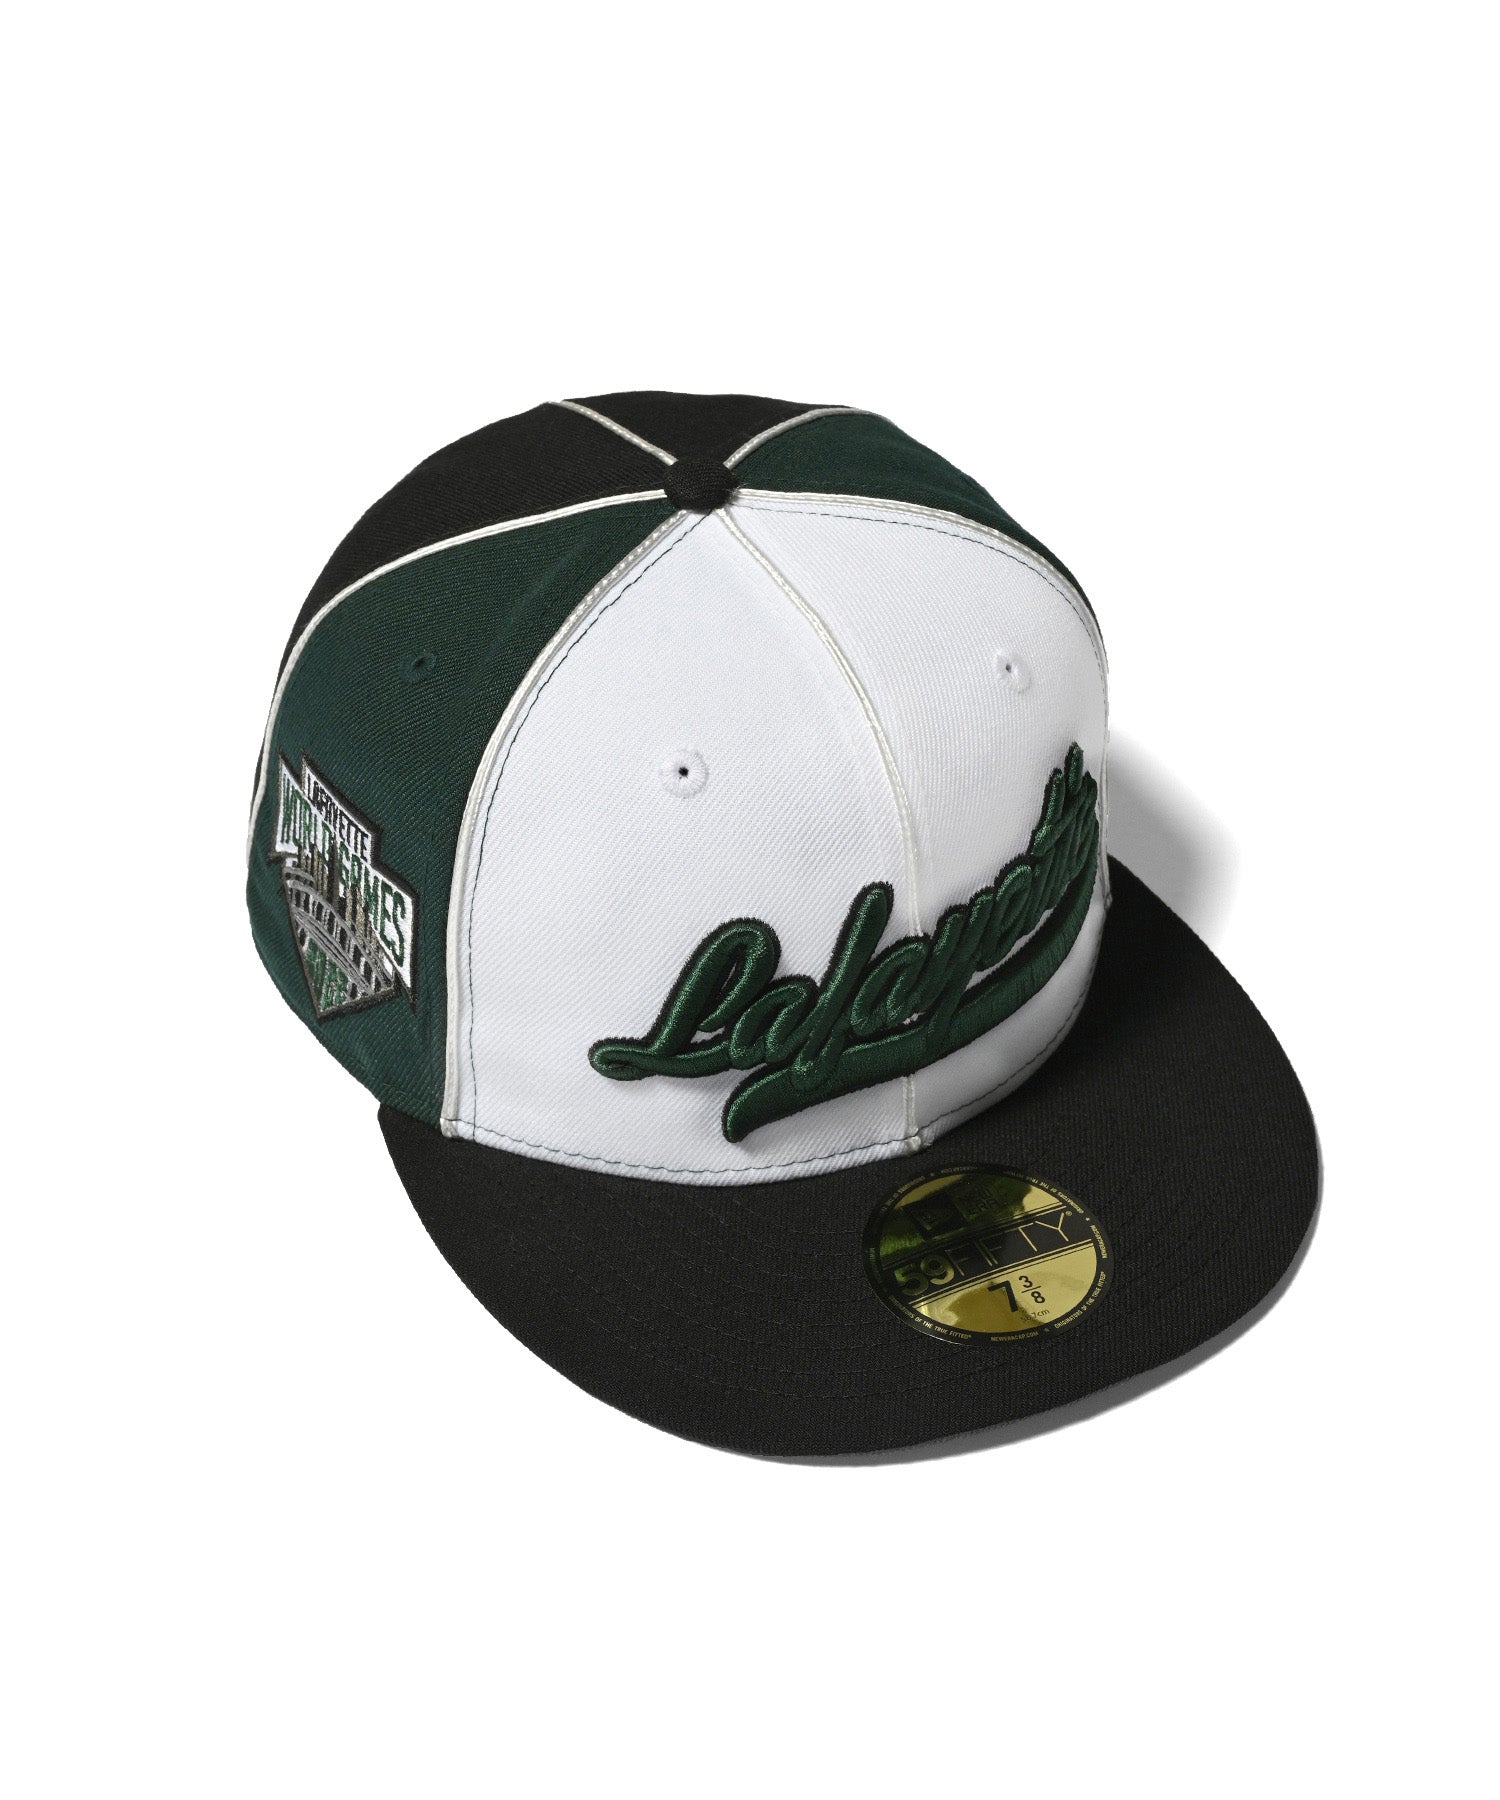 LFYT x New Era 3 Tone LF Logo 59fifty Fitted Hat – PRIVILEGE New York